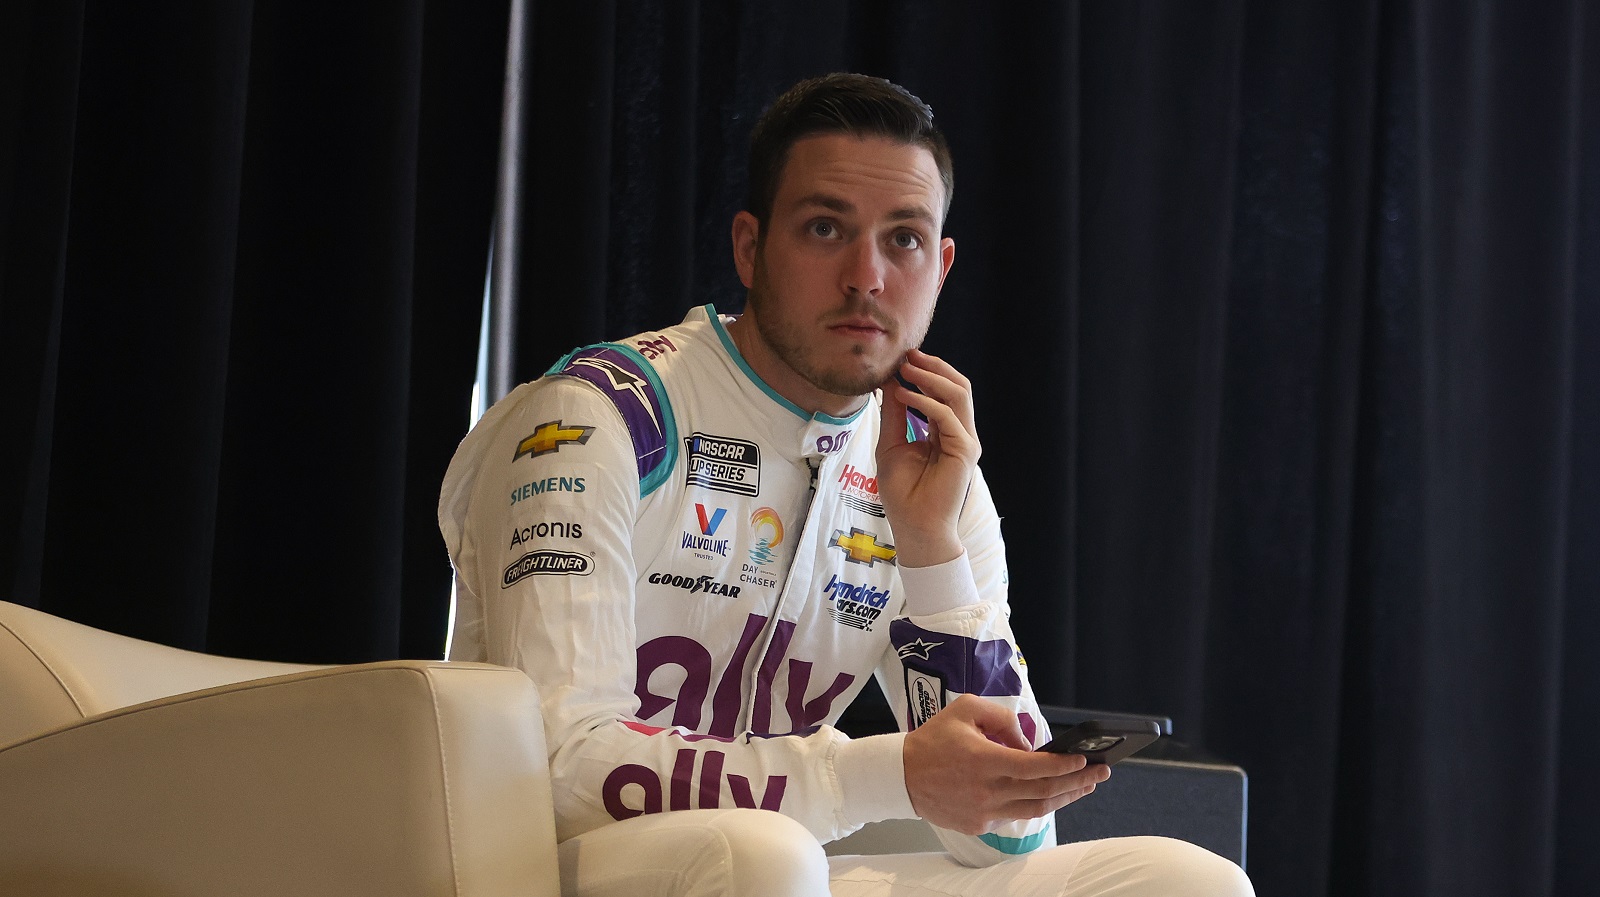 Alex Bowman, driver of the No. 48 Chevrolet, waits to speak to the media during the NASCAR Cup Series Daytona 500 Media Day.